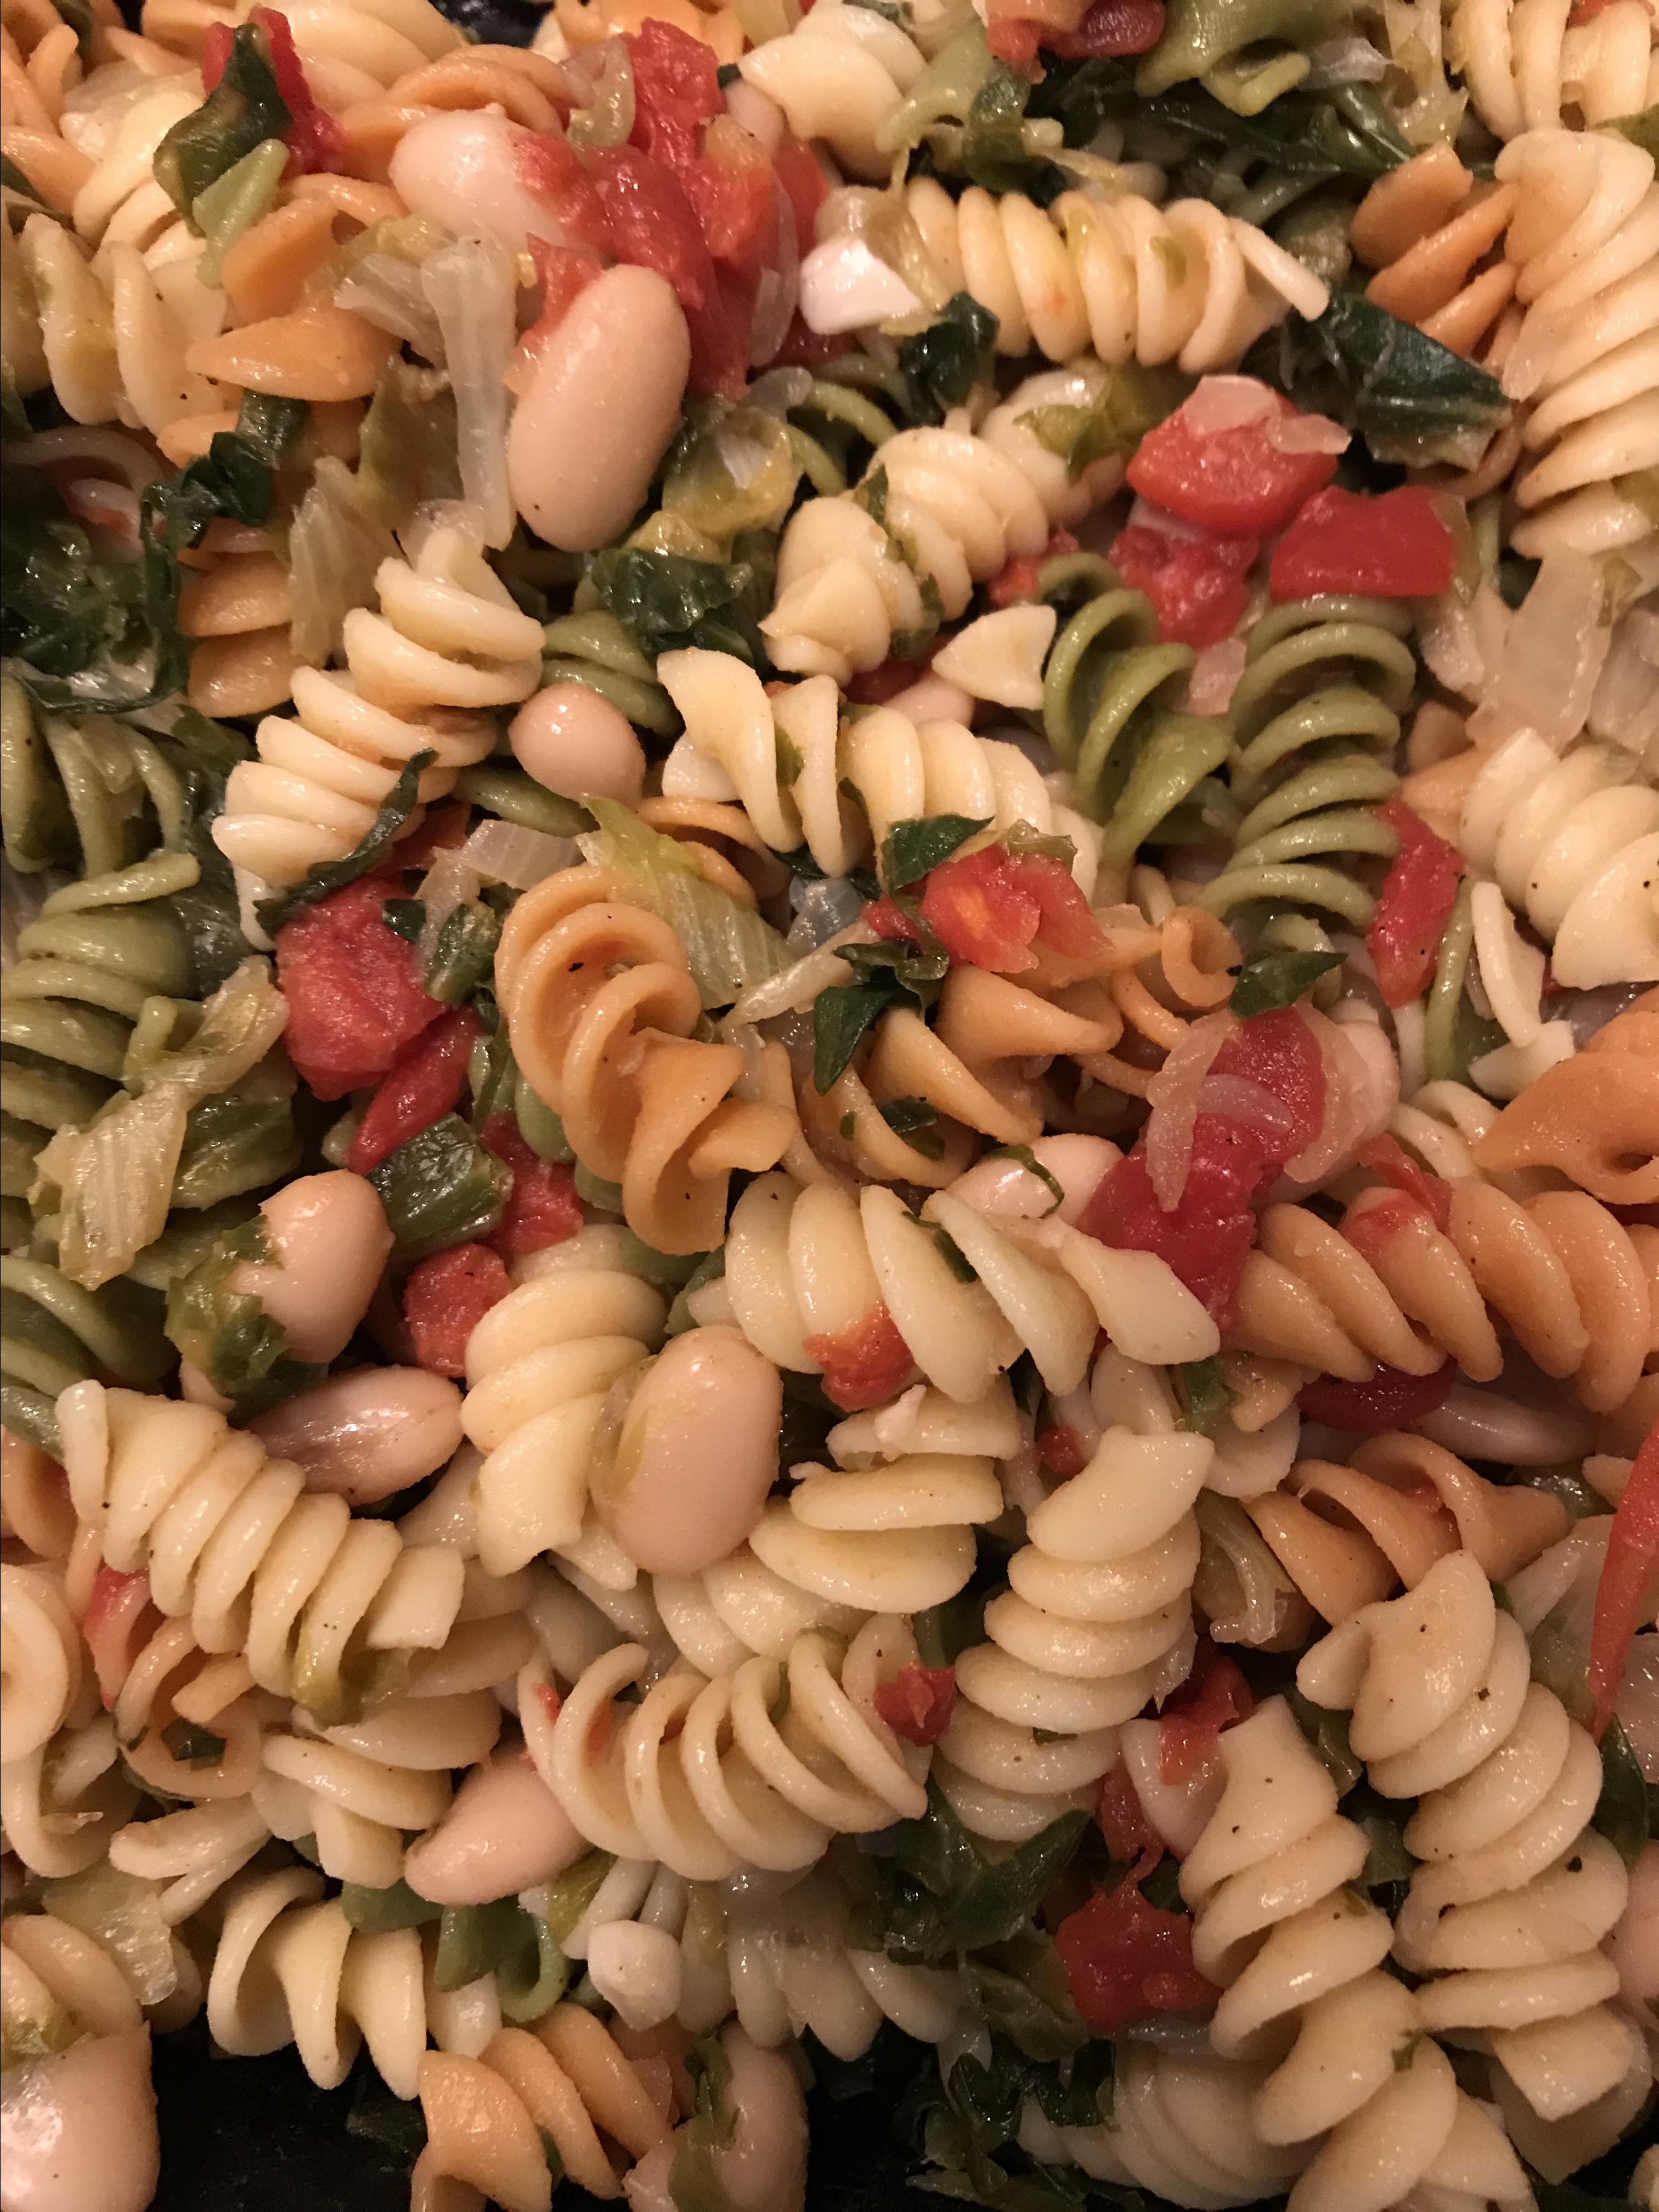 Penne Pasta with Cannellini Beans and Escarole 